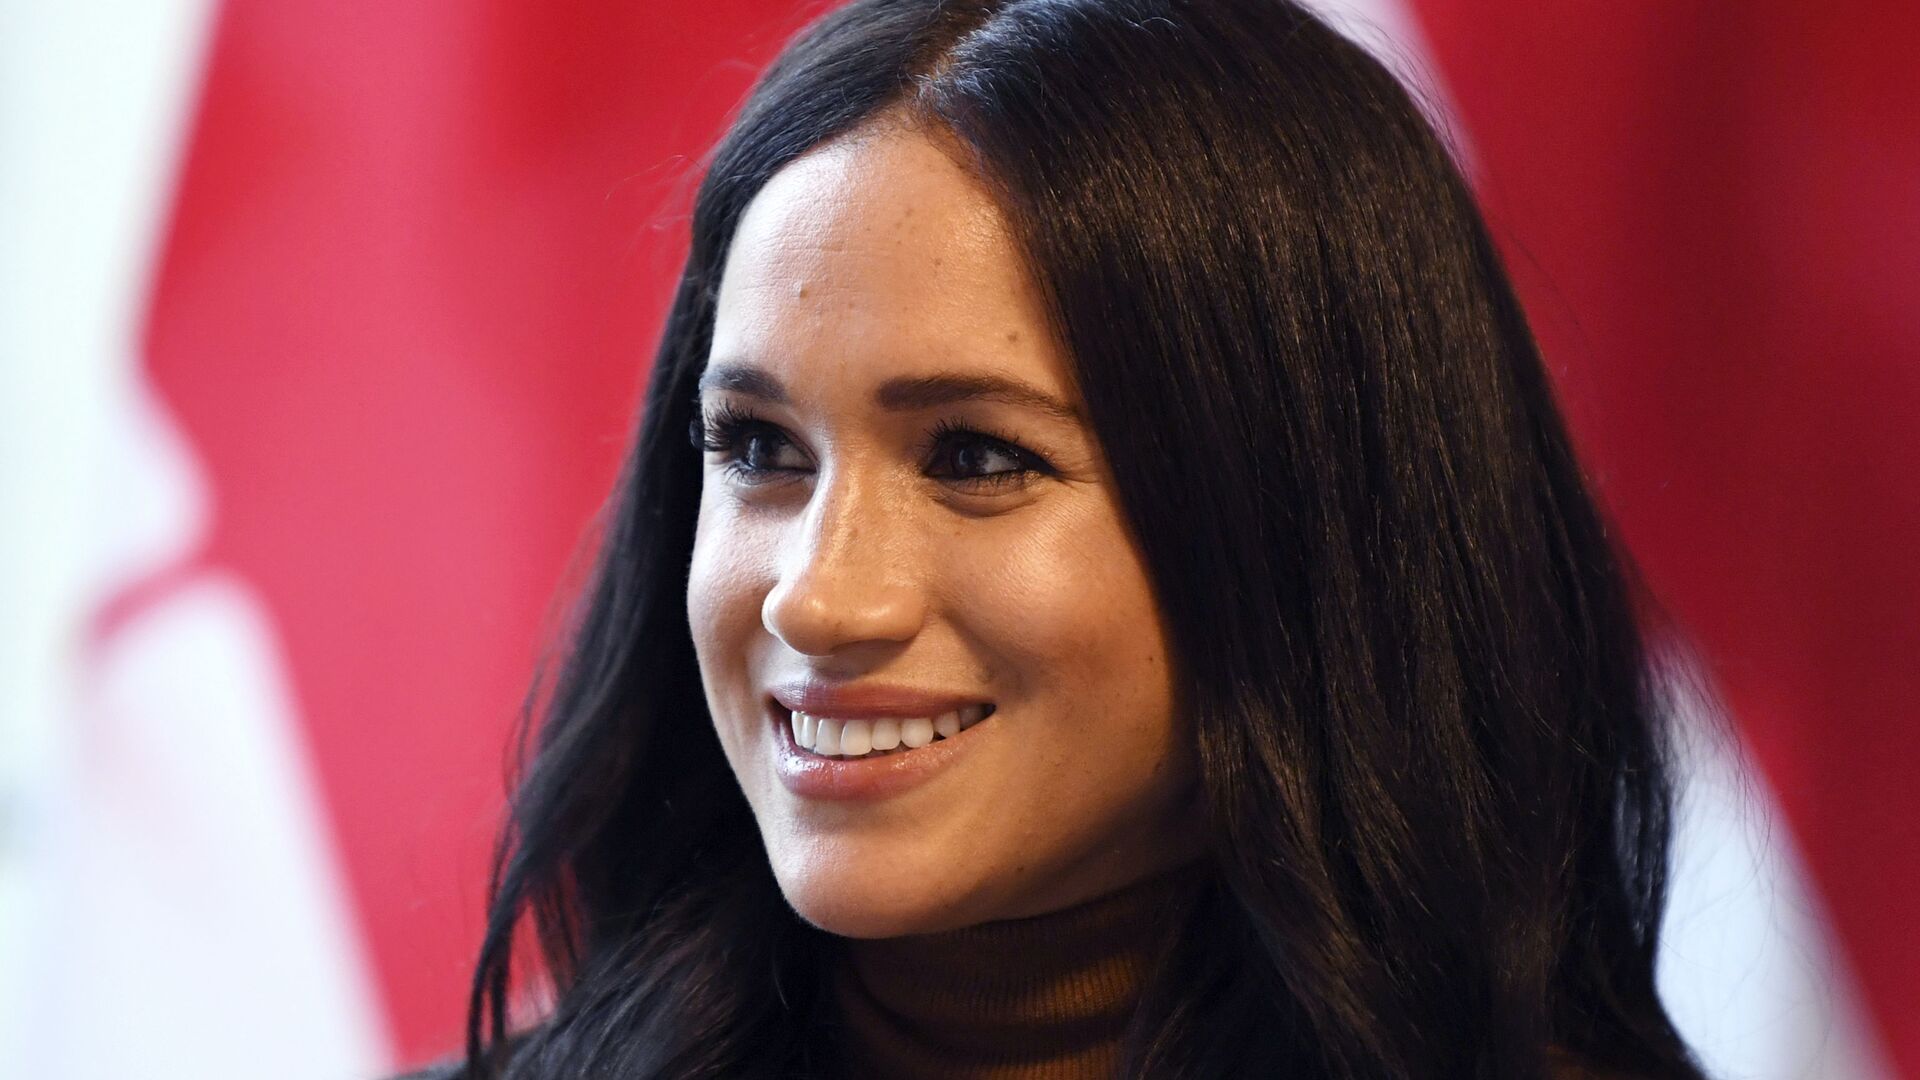 In this Tuesday, Jan. 7, 2020 file photo, Meghan, Duchess of Sussex smiles during her visit with Prince Harry to Canada House, in London - Sputnik International, 1920, 09.03.2022